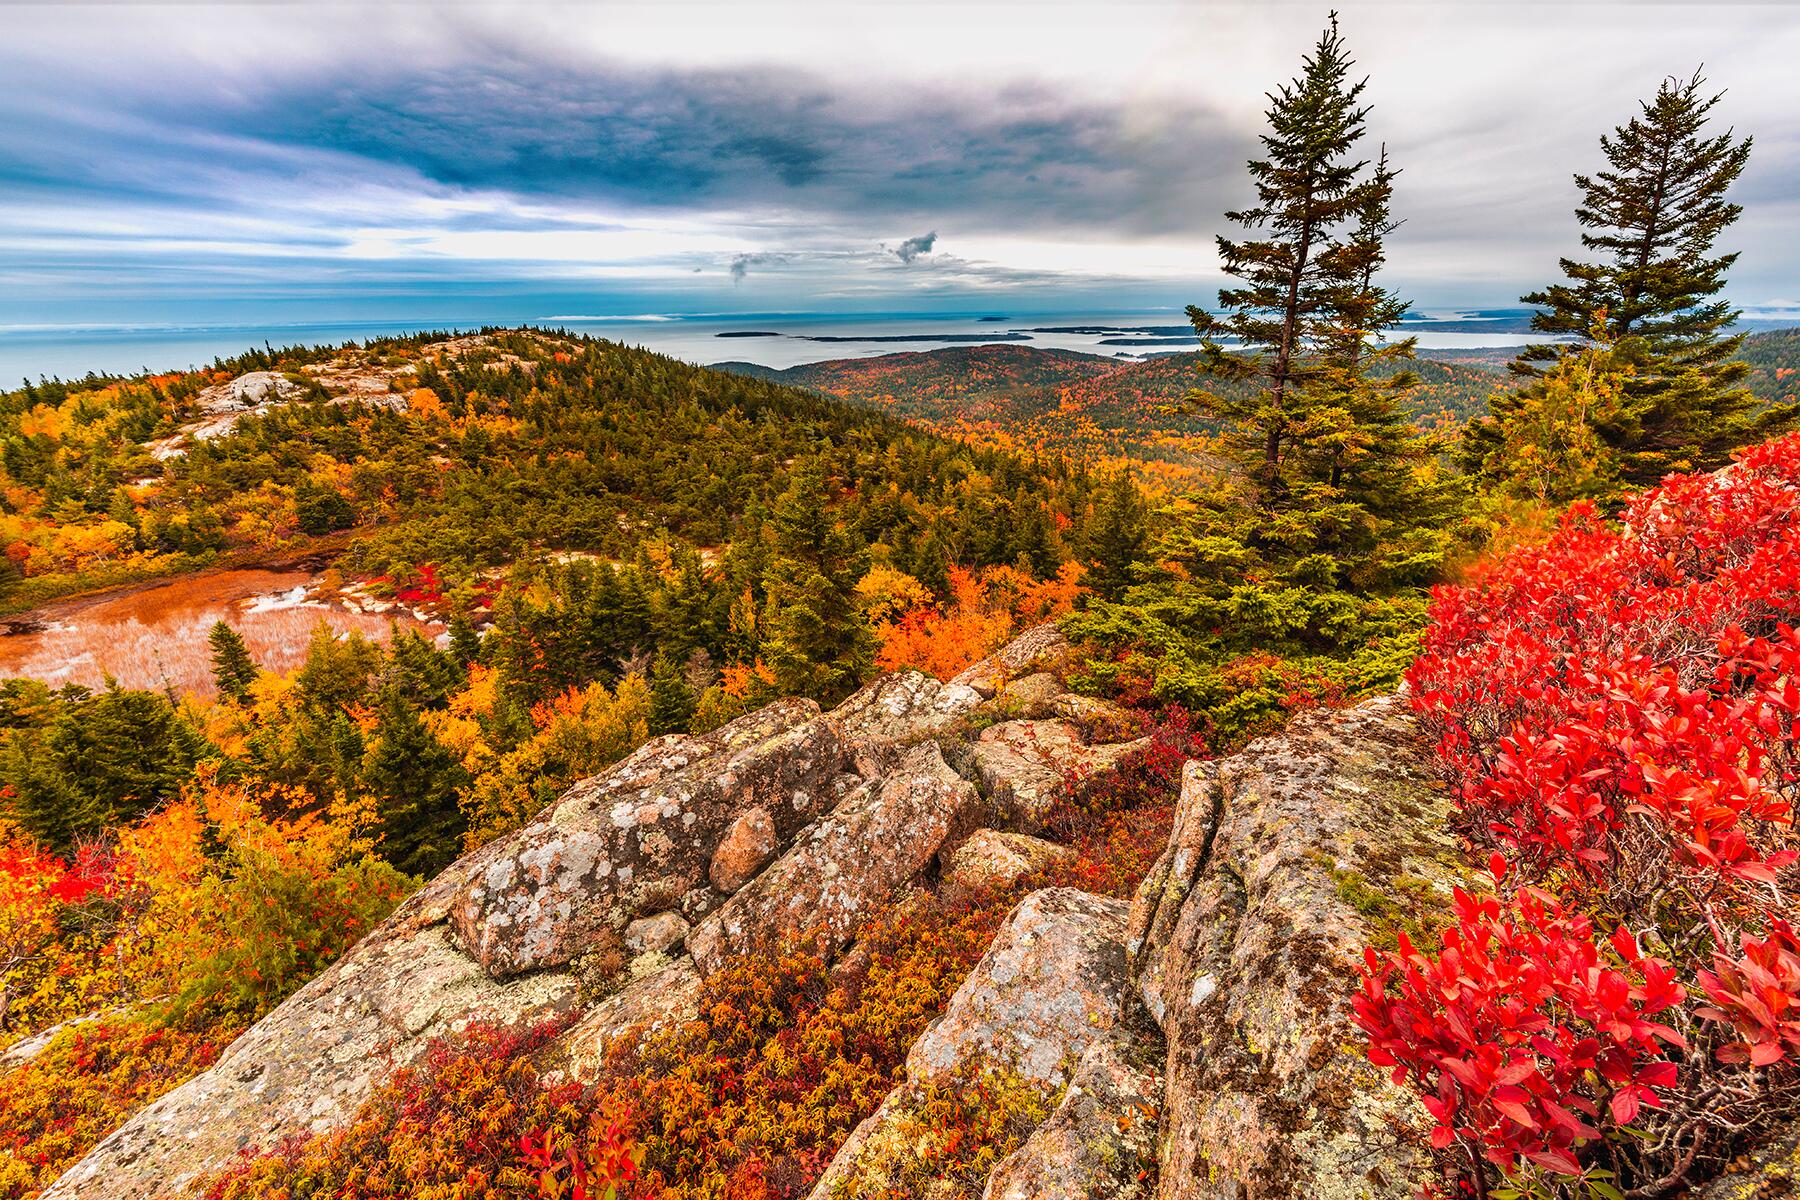 Acadia National Park and Mount Desert Island Photo Gallery Fodor’s Travel